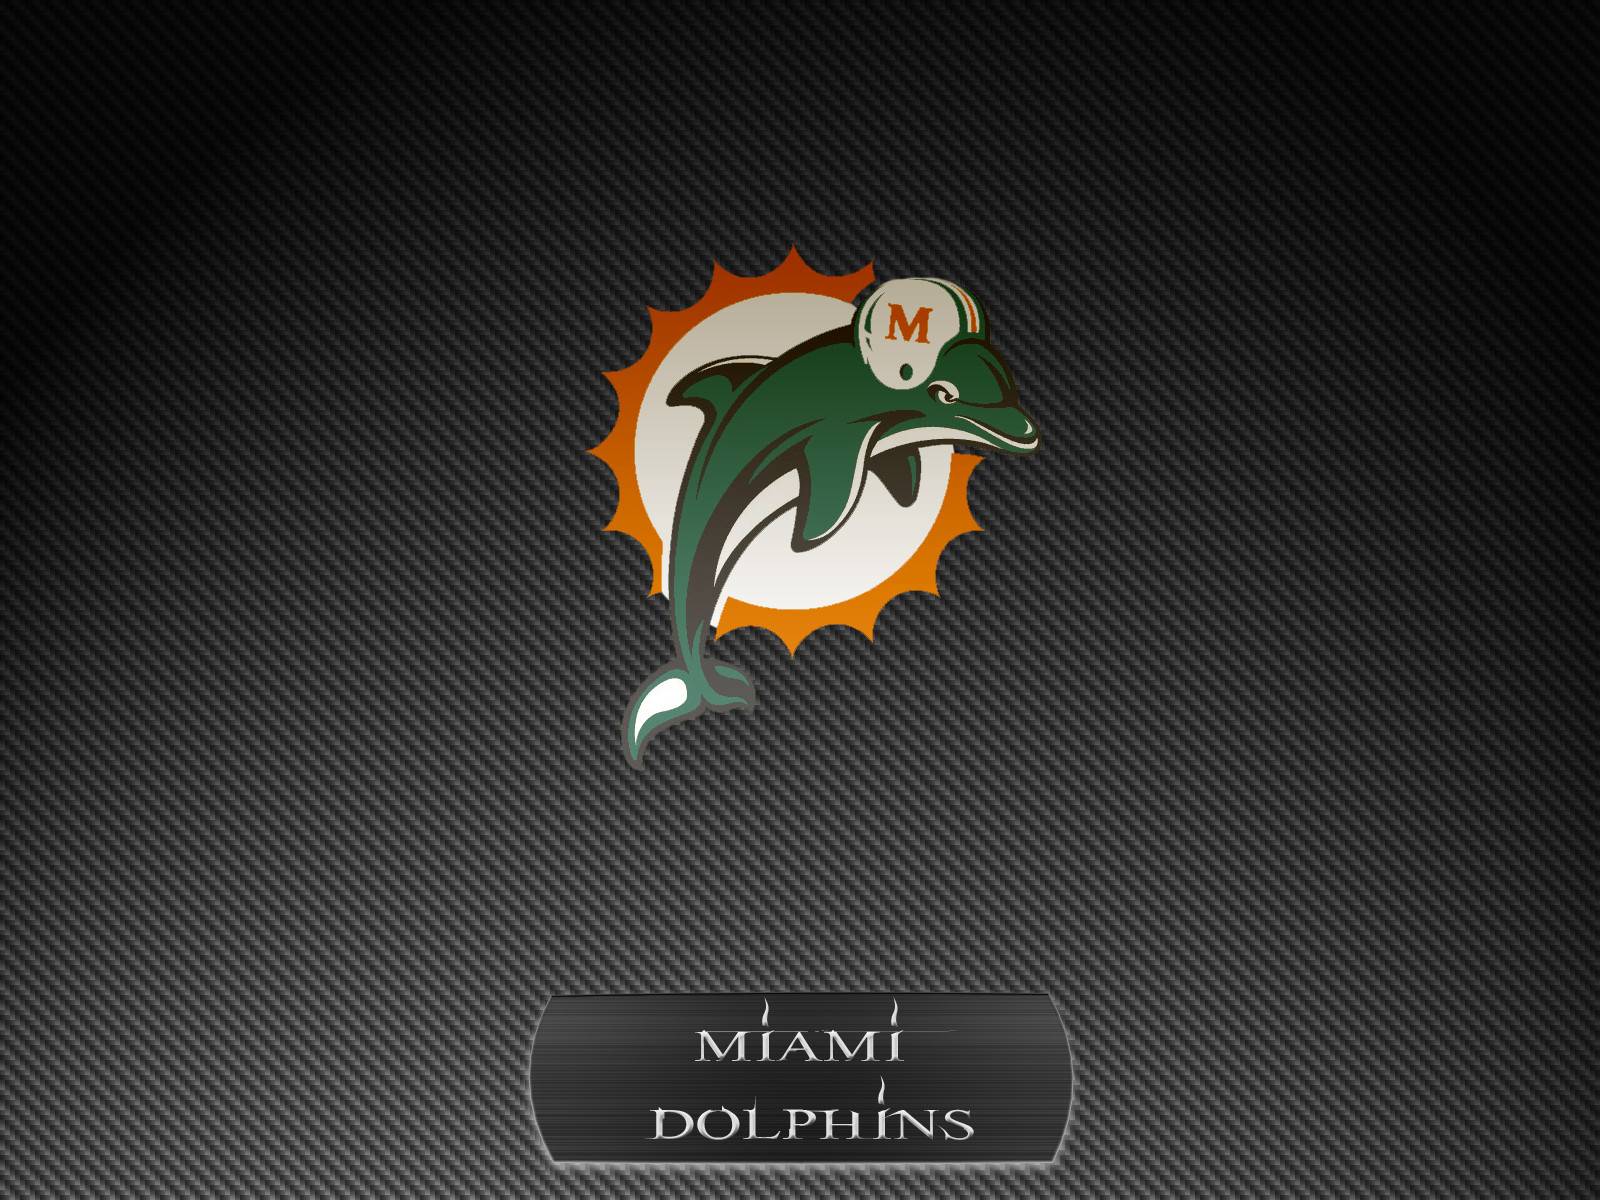 You Like This Miami Dolphins Wallpaper HD As Much We Do